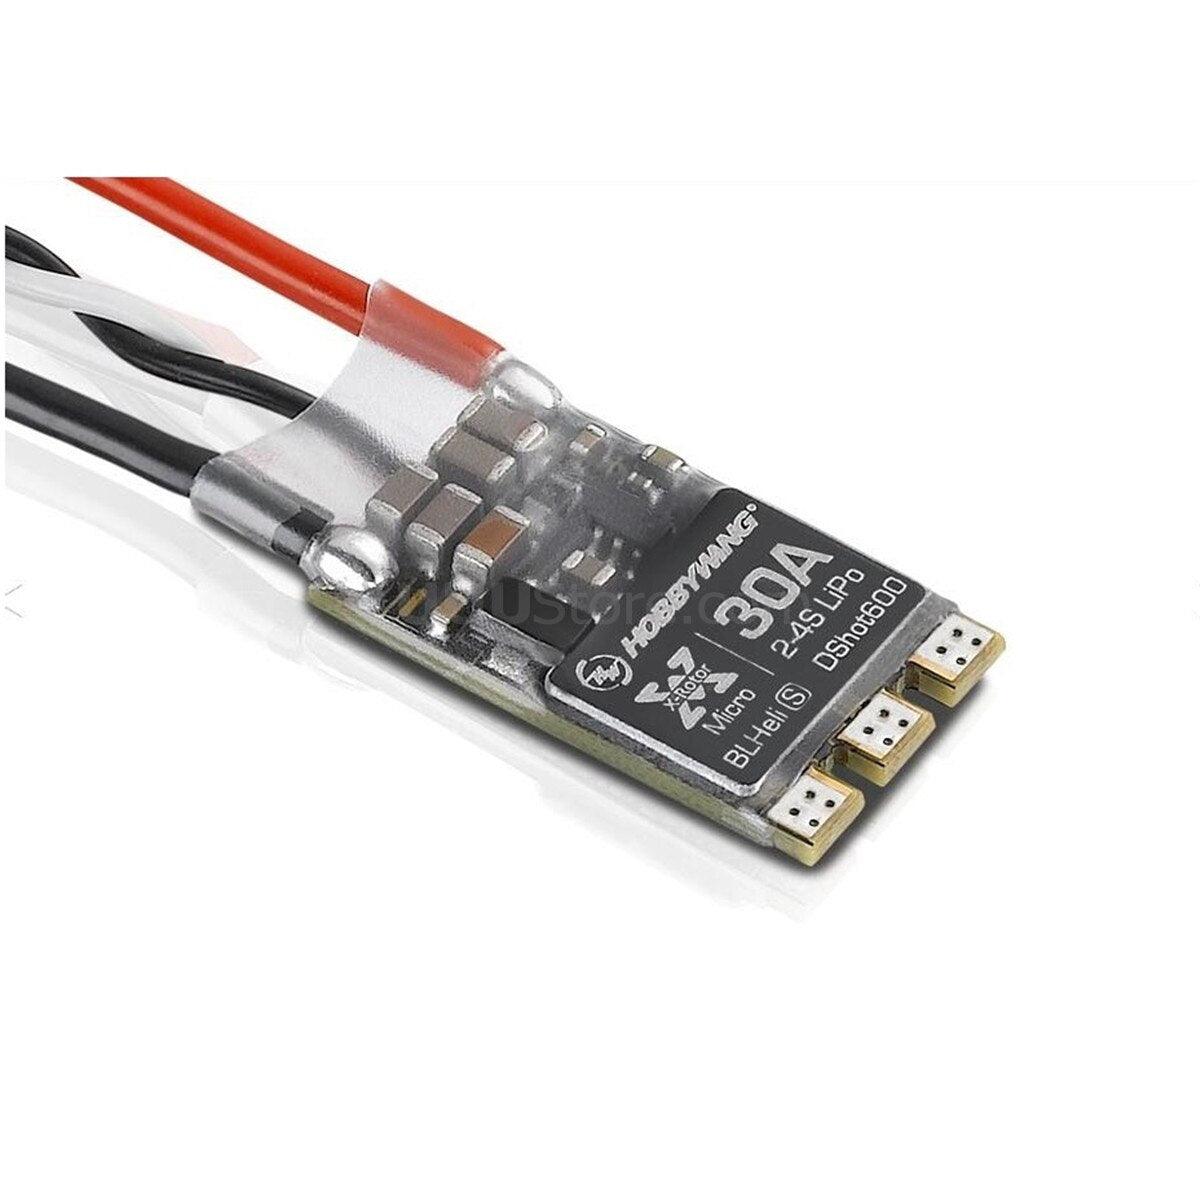 4pcs/lot Hobbywing XRotor Micro BLHeli-s 30A ESC Brushless Speed Controller for RC Racer Drone FPV Racing Quadcopter - RCDrone